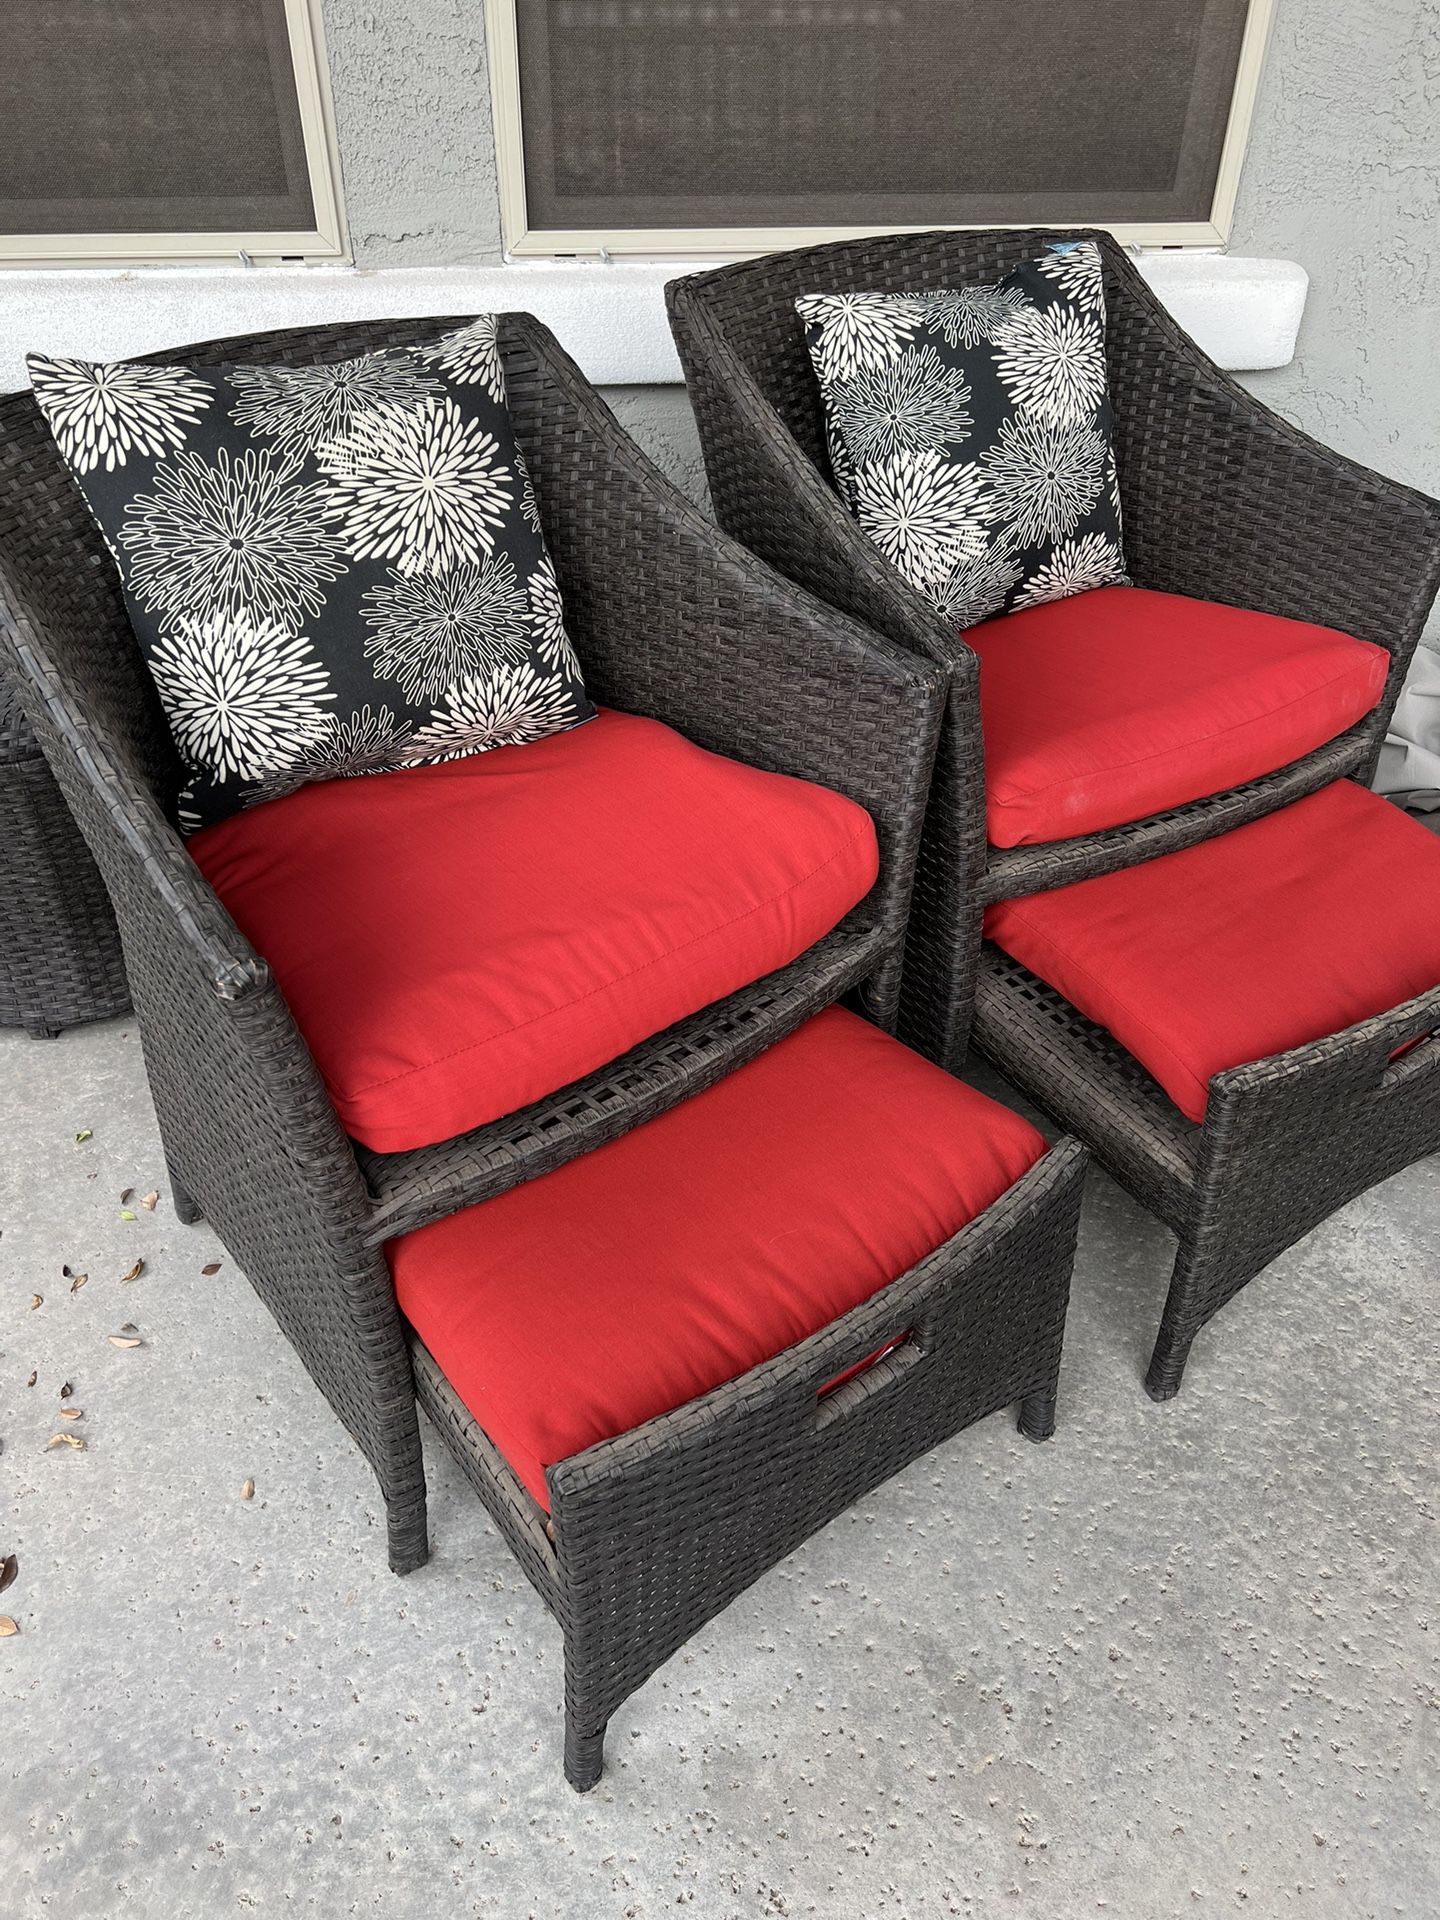 Patio Chairs with Footstools & Pillows